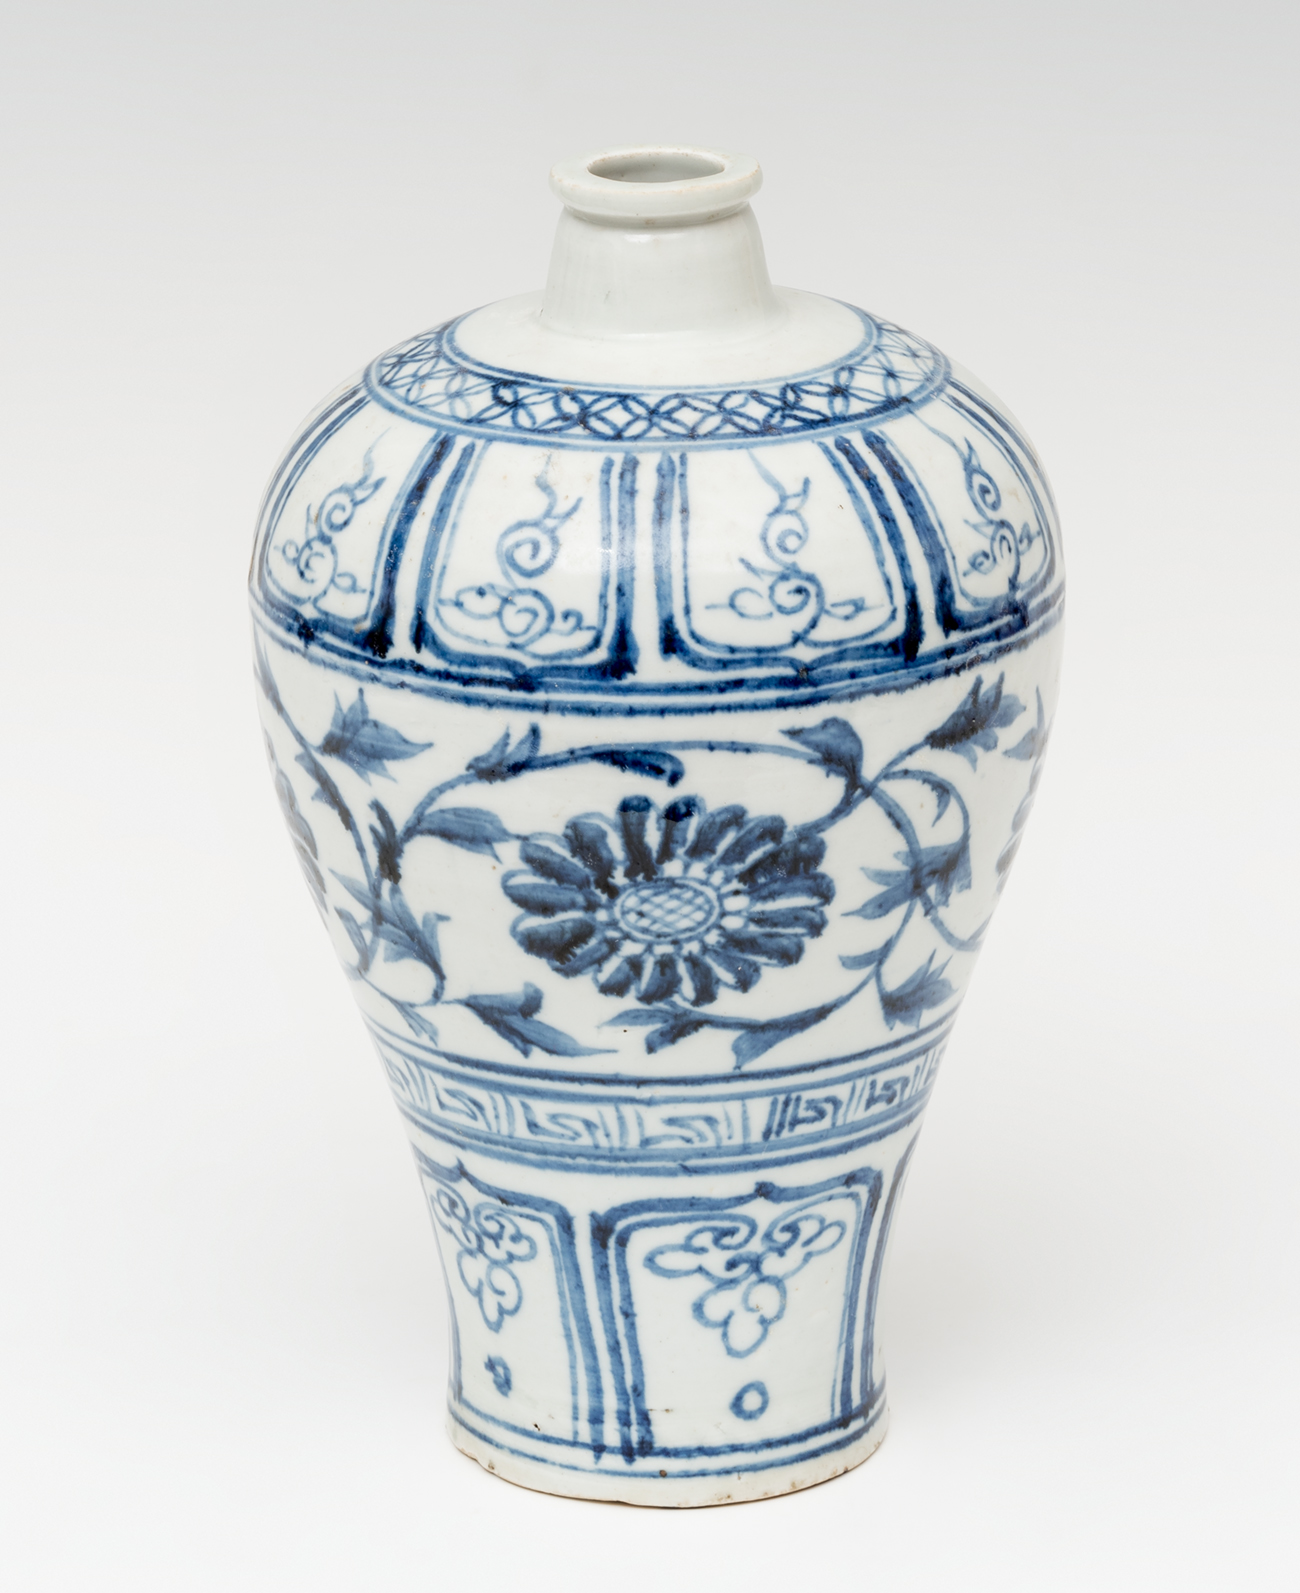 Meiping vase; China, 19th century.Porcelain.Measurements: 25 x 8 cm.Meiping vase made of enamelled